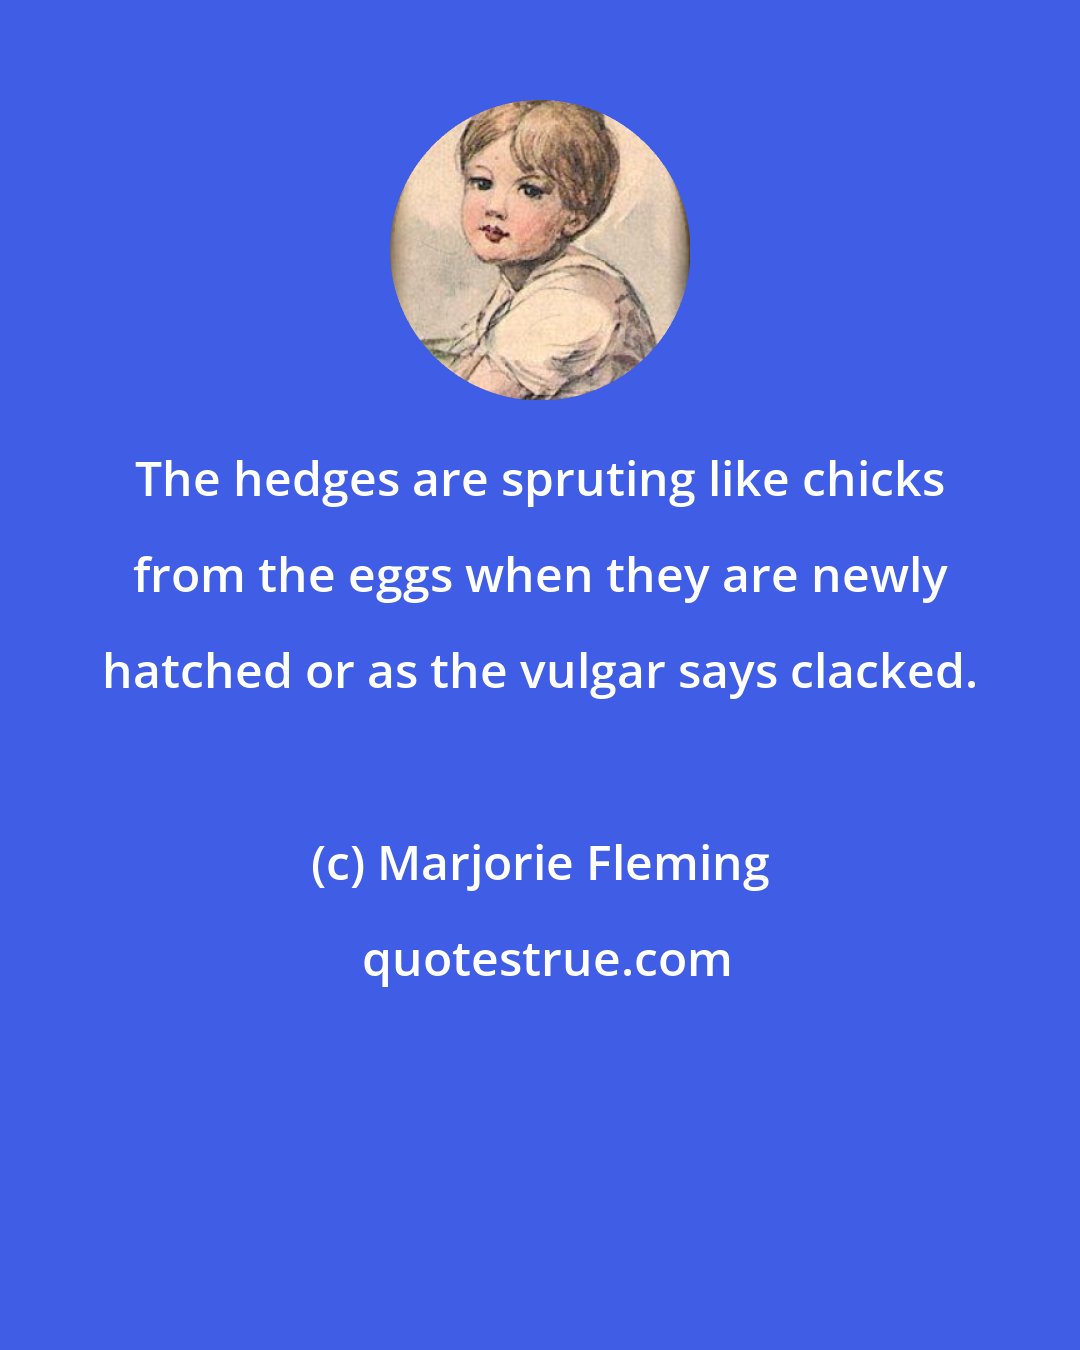 Marjorie Fleming: The hedges are spruting like chicks from the eggs when they are newly hatched or as the vulgar says clacked.